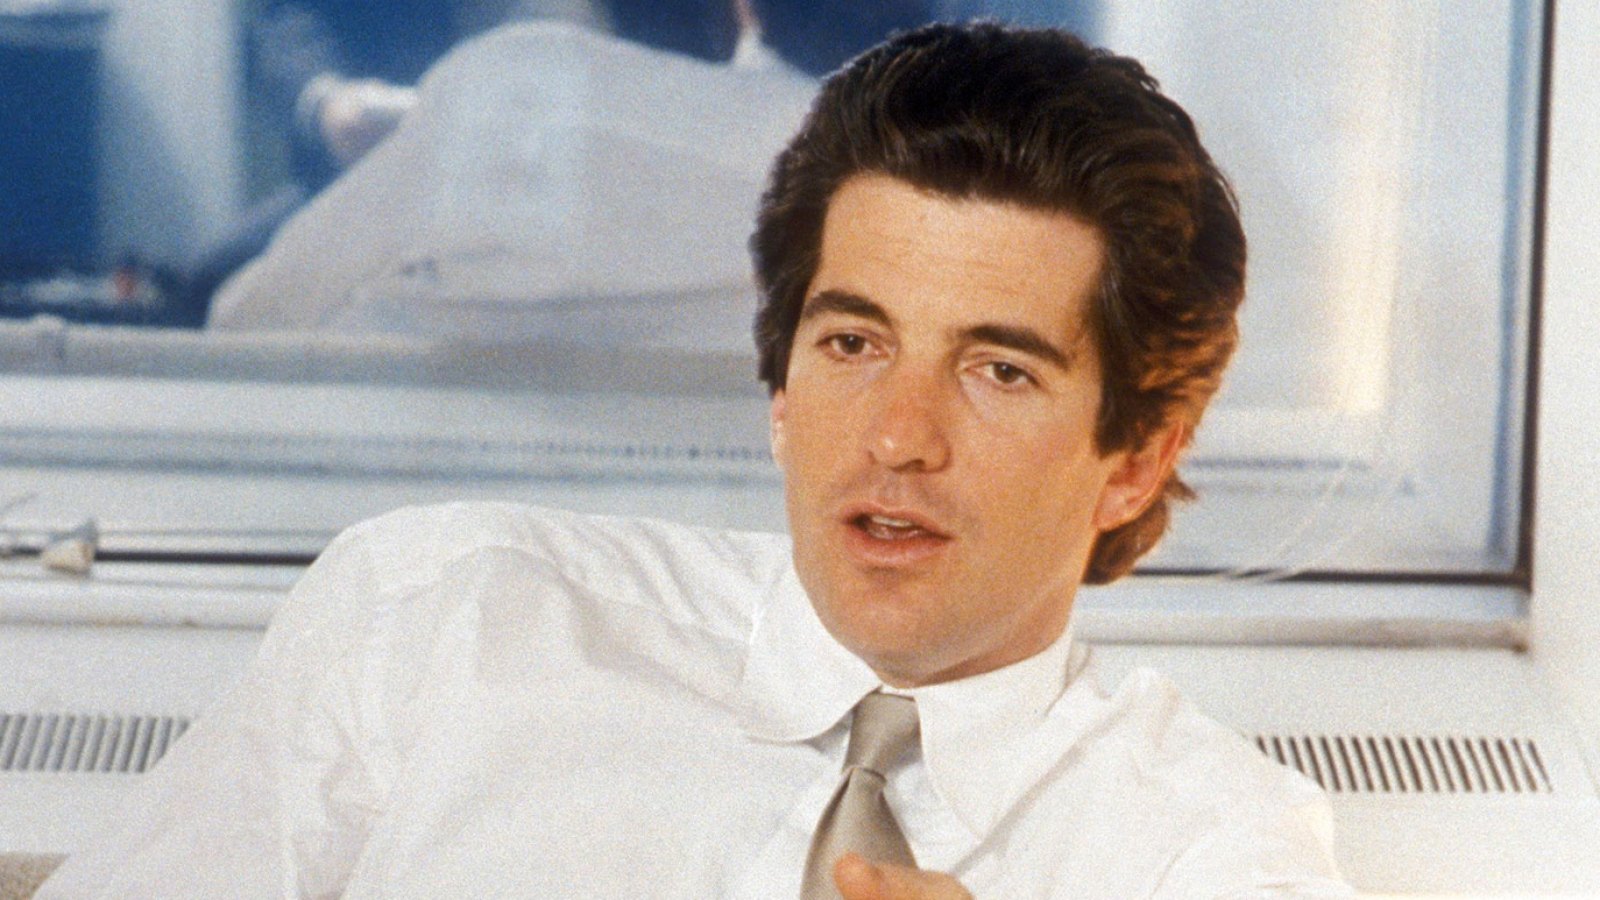 John F. Kennedy Jr. 1999 Plane Crash Was Not an Accident Podcast